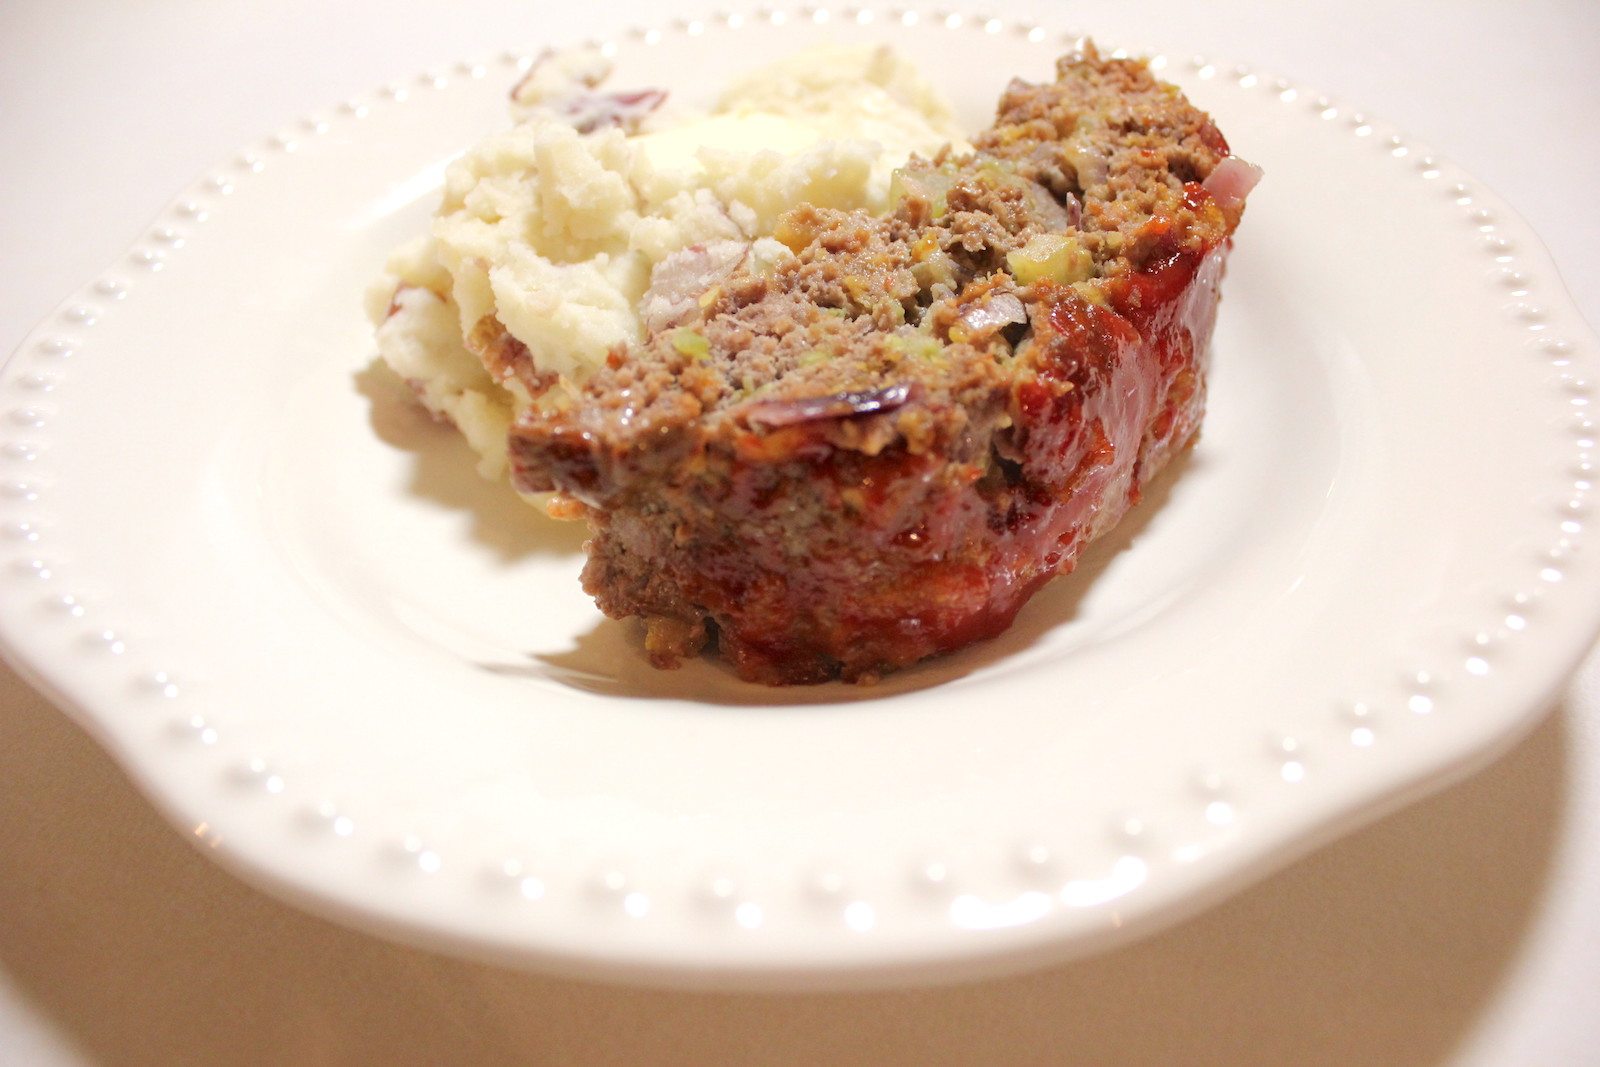 Grandma D's old fashioned homemade meatloaf recipe